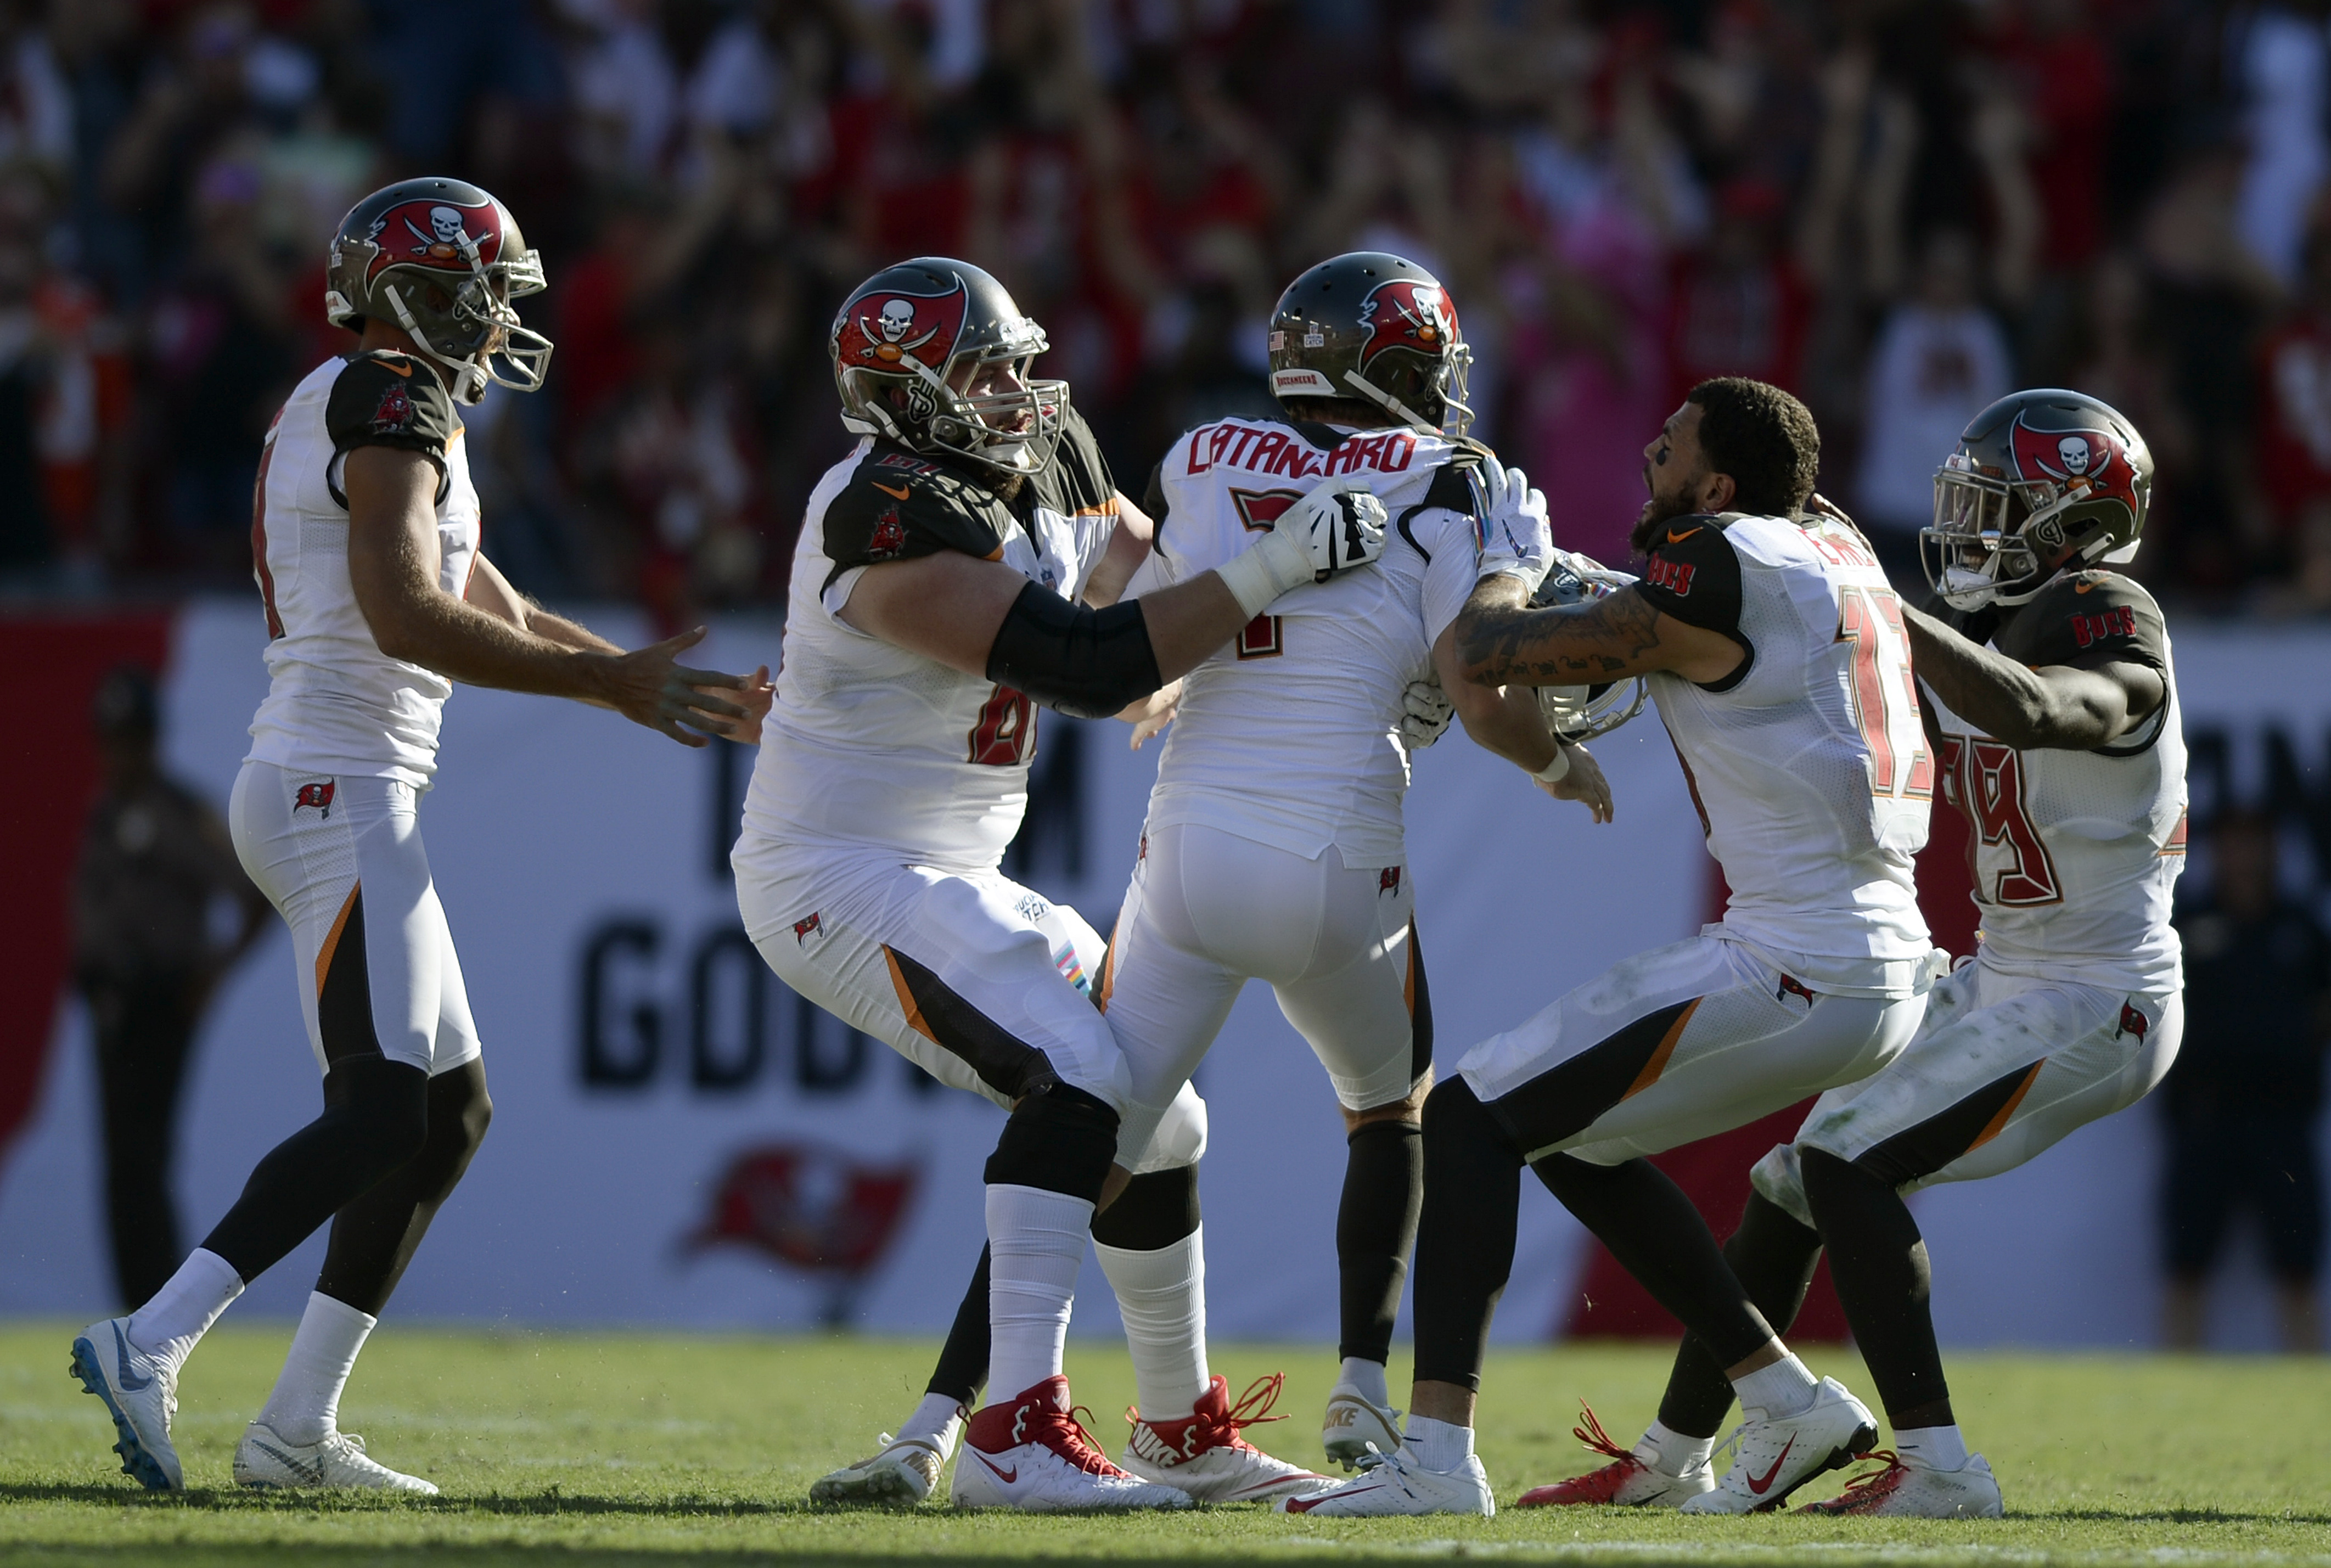 Browns lose another close one, this time to Buccaneers